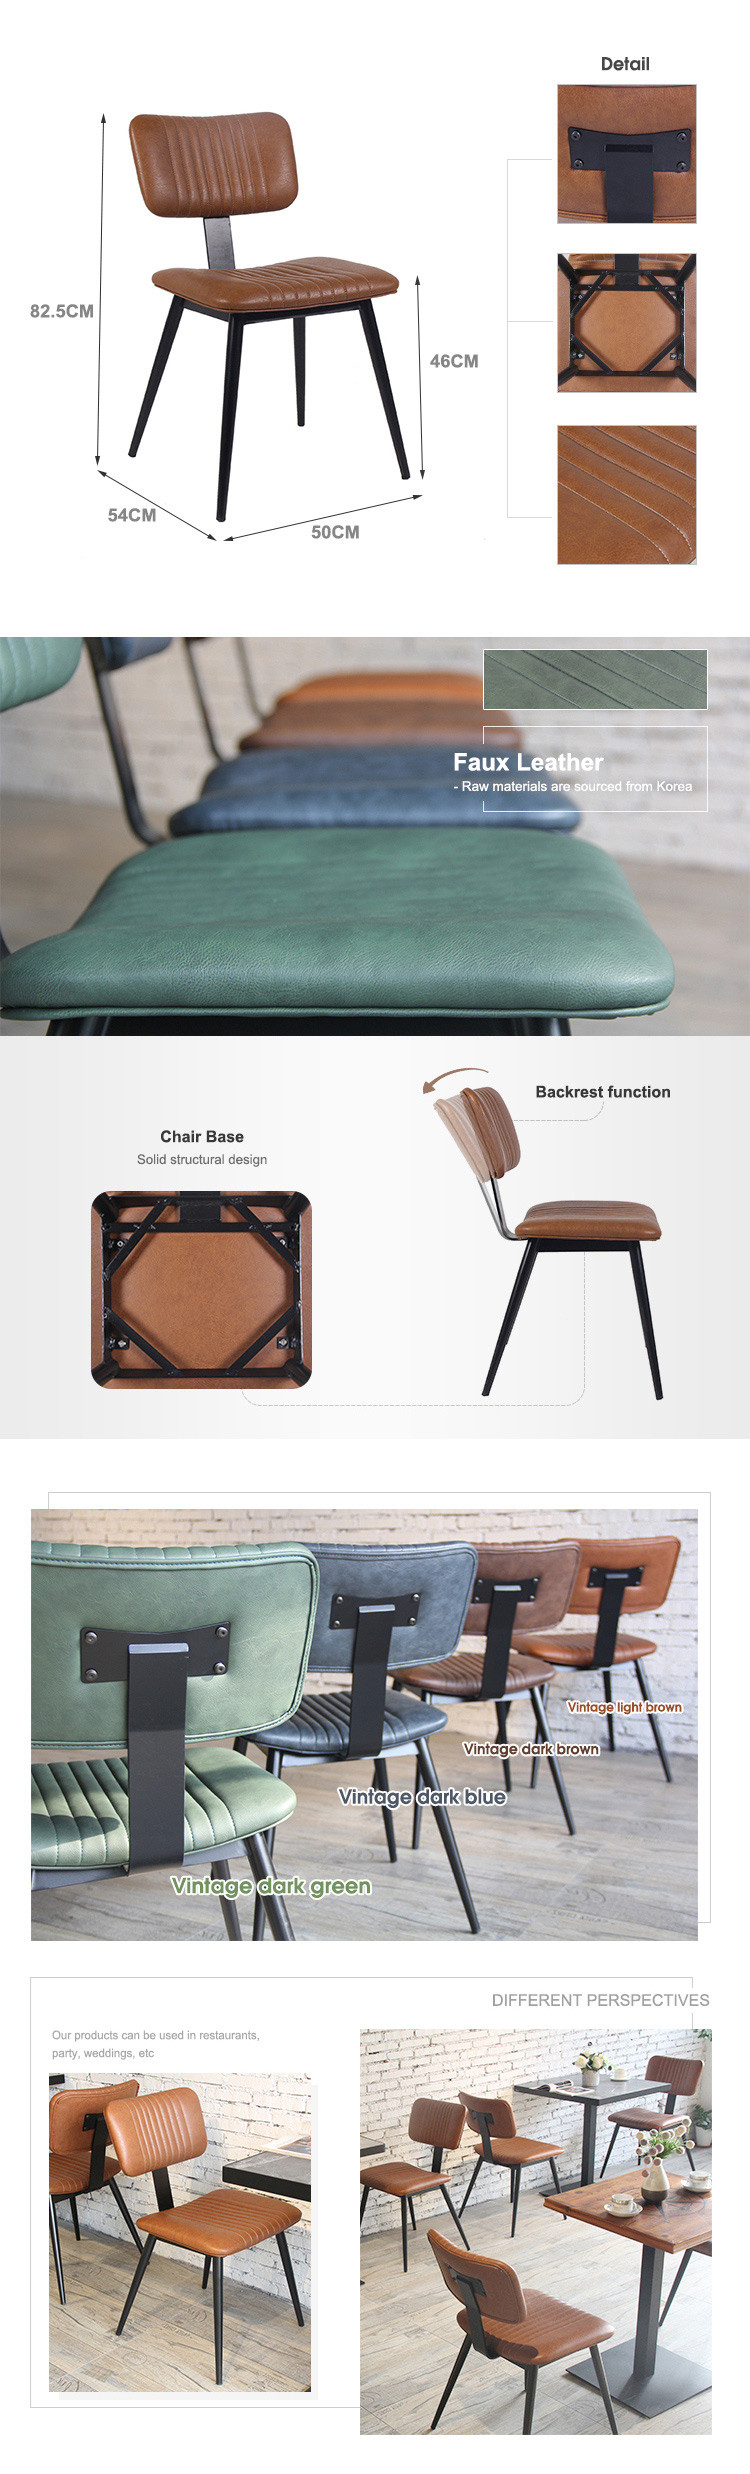 Indoor leather chair details